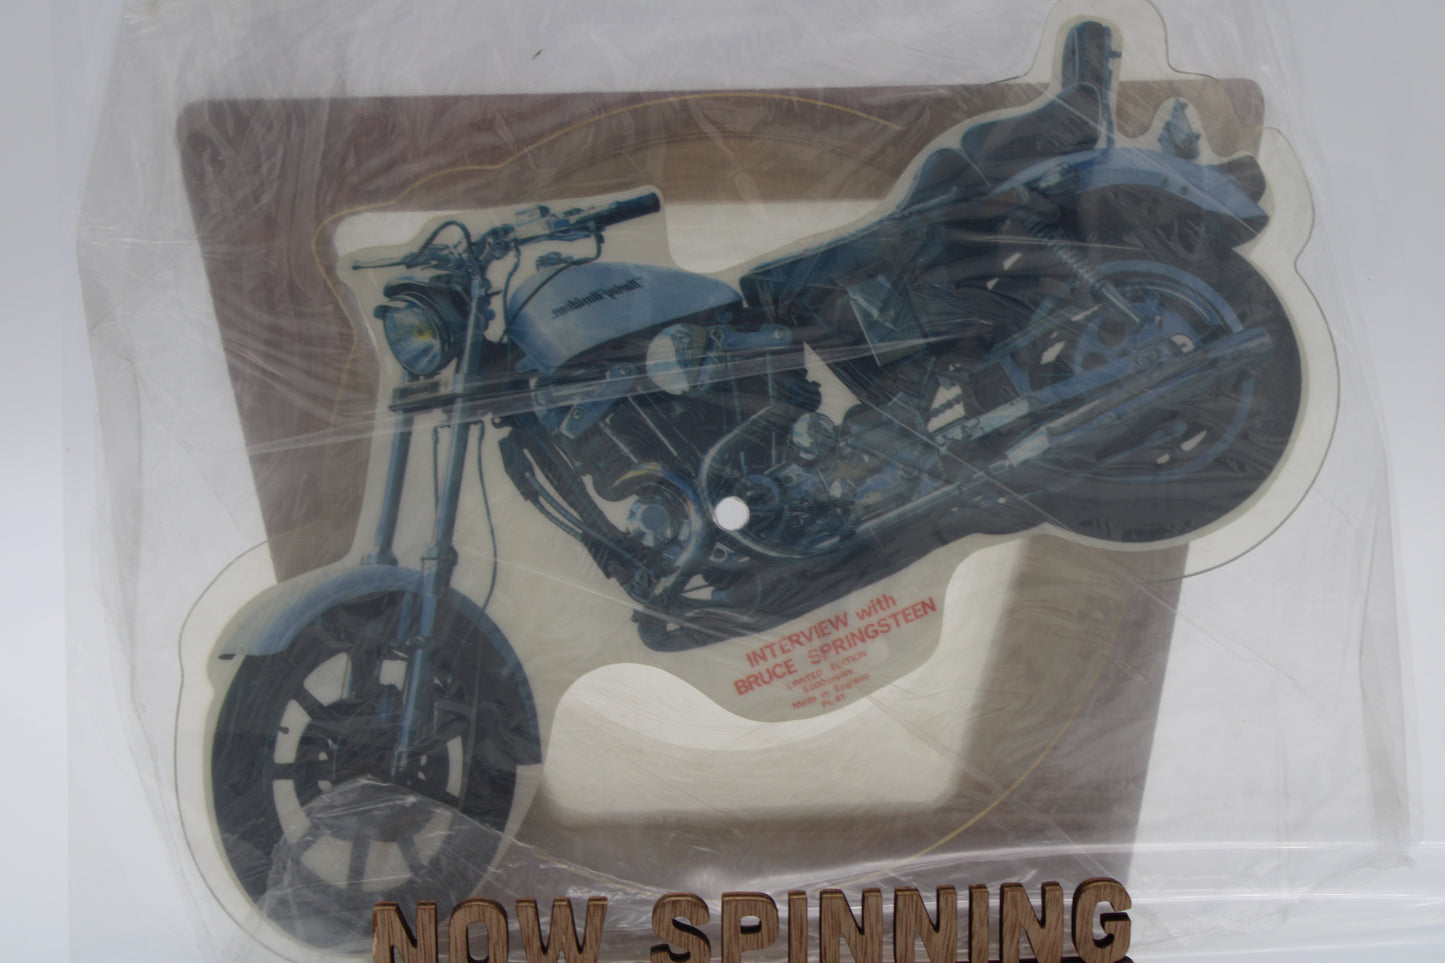 Bruce Springsteen - Interview on Vinyl Harley Davidson Shaped Picture Disc in PVC sleeve  BLV